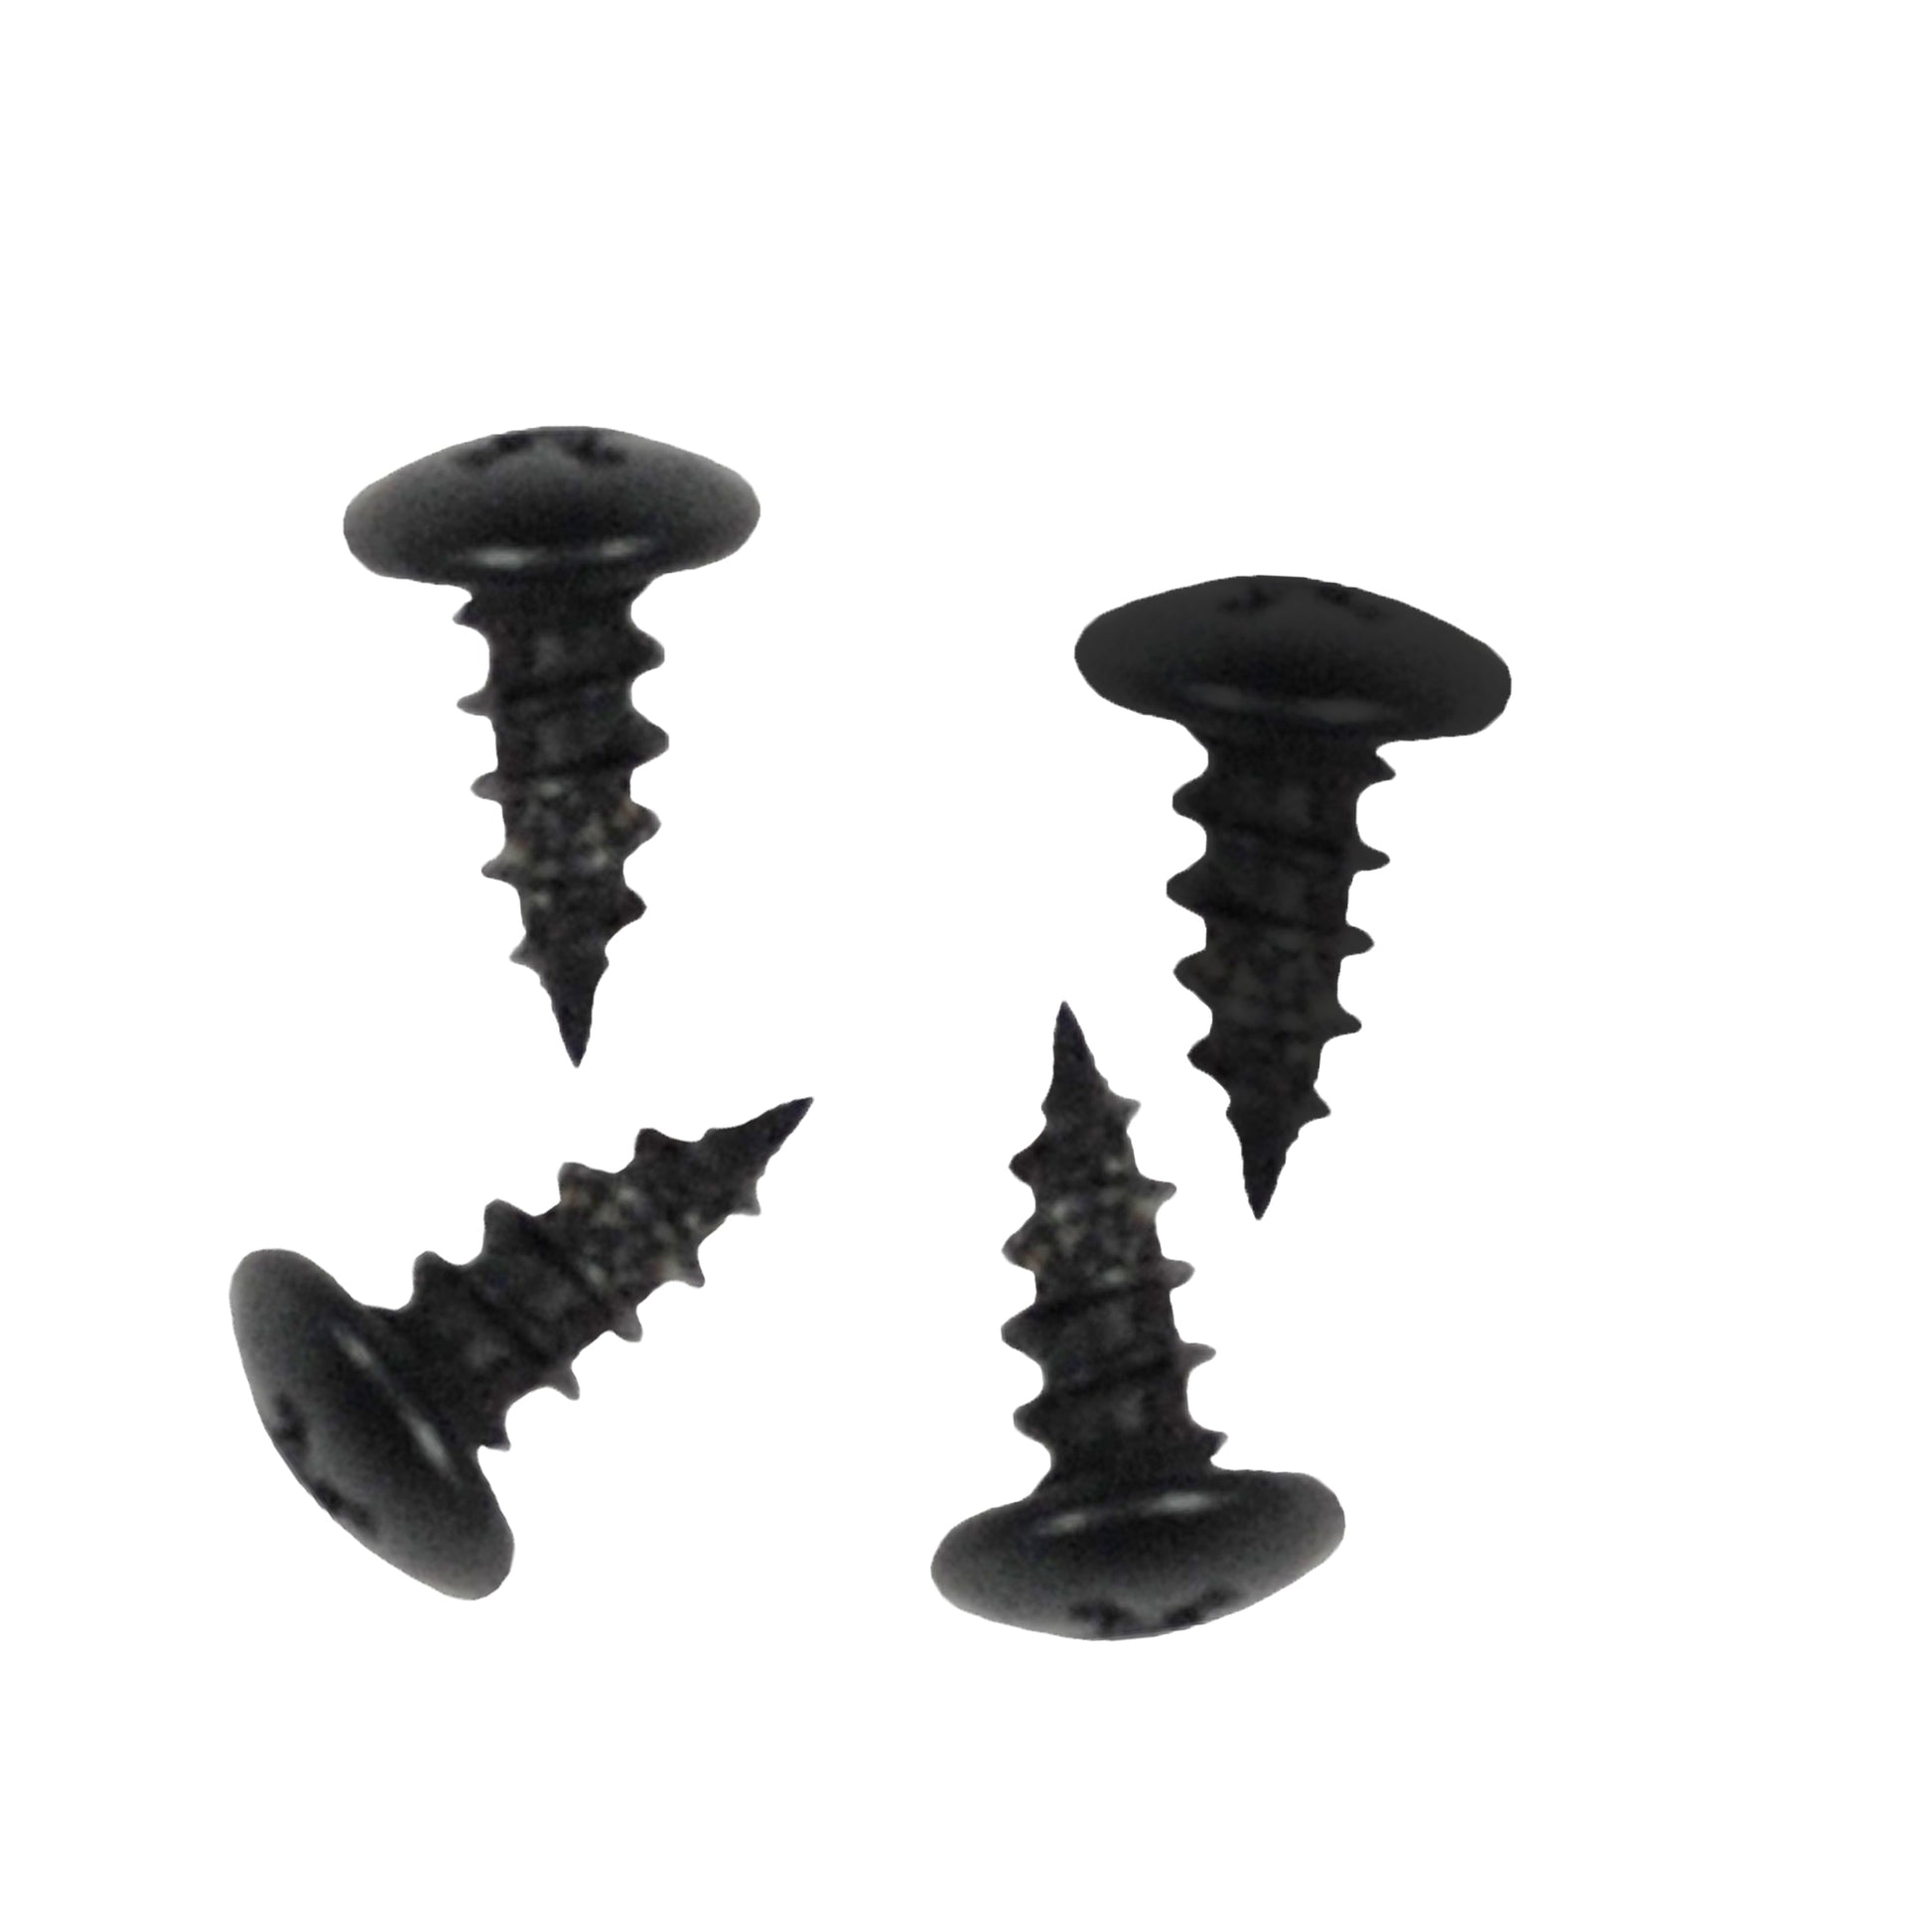 Pan Head Phillips Self-Tapping Screw for 400-Series Air Mover